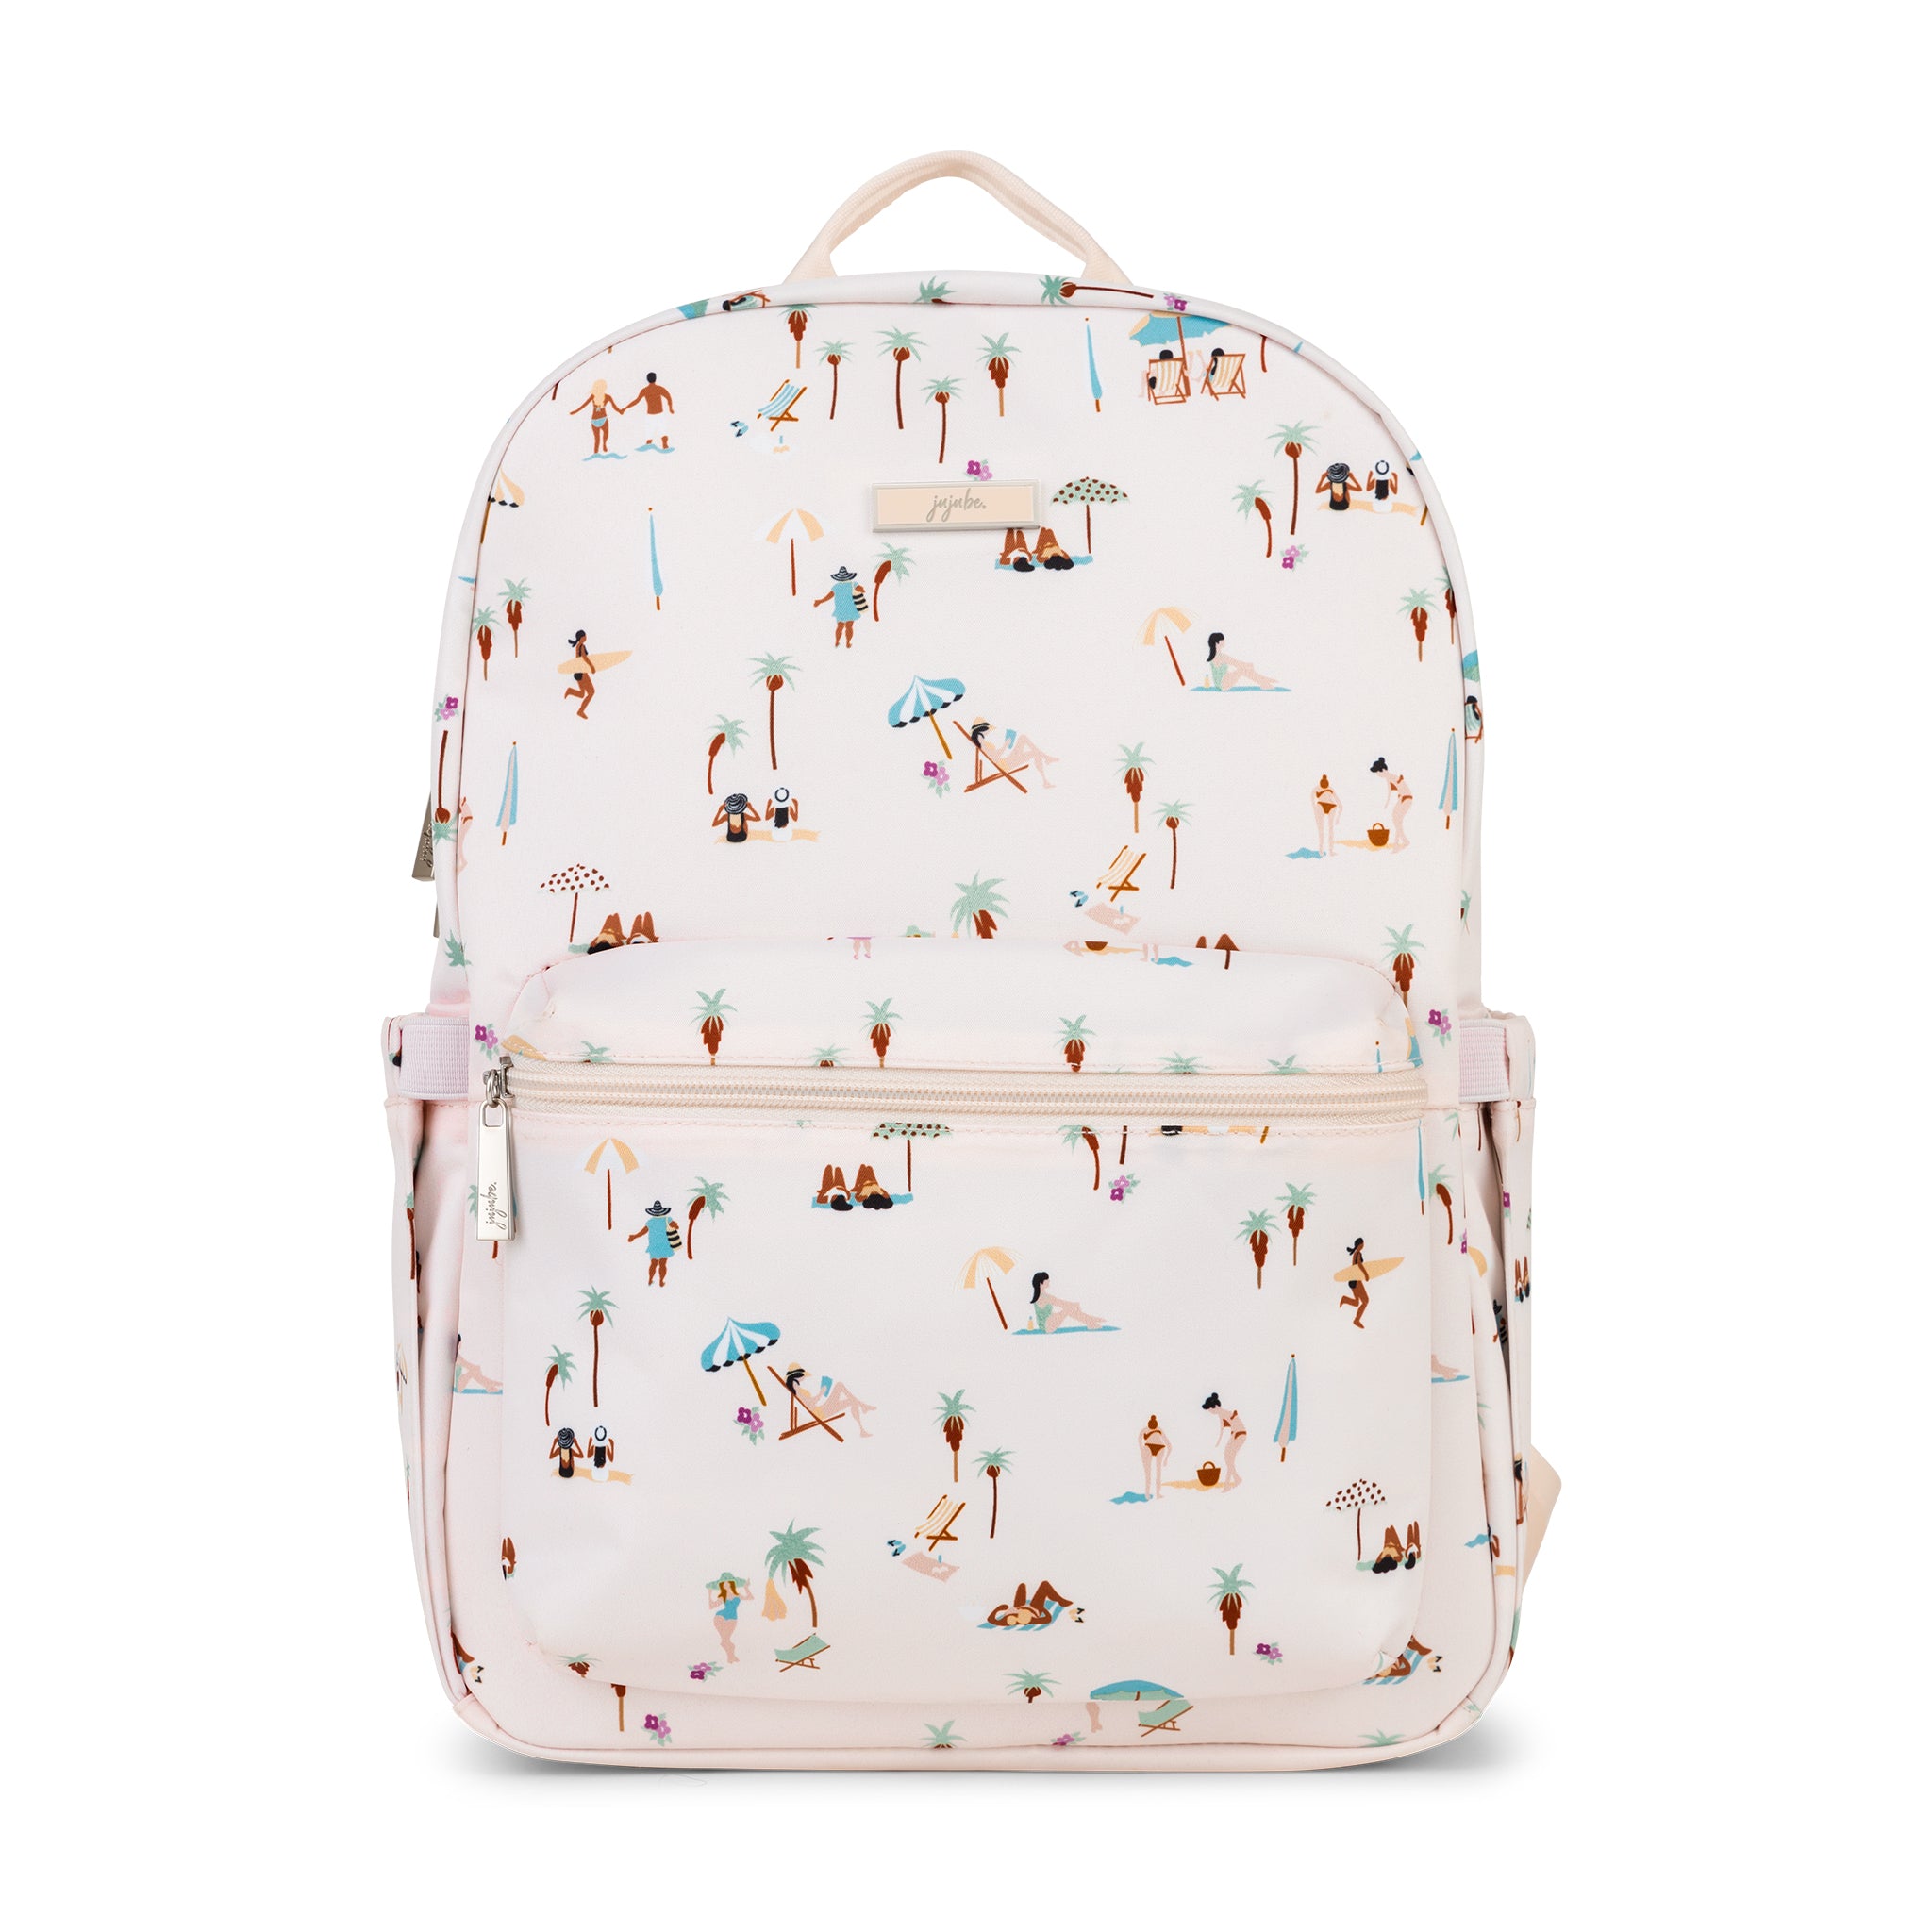 Multicolor sunbathers, surfers, palm trees and beach umbrellas on pale blush background Midi Backpack Front View